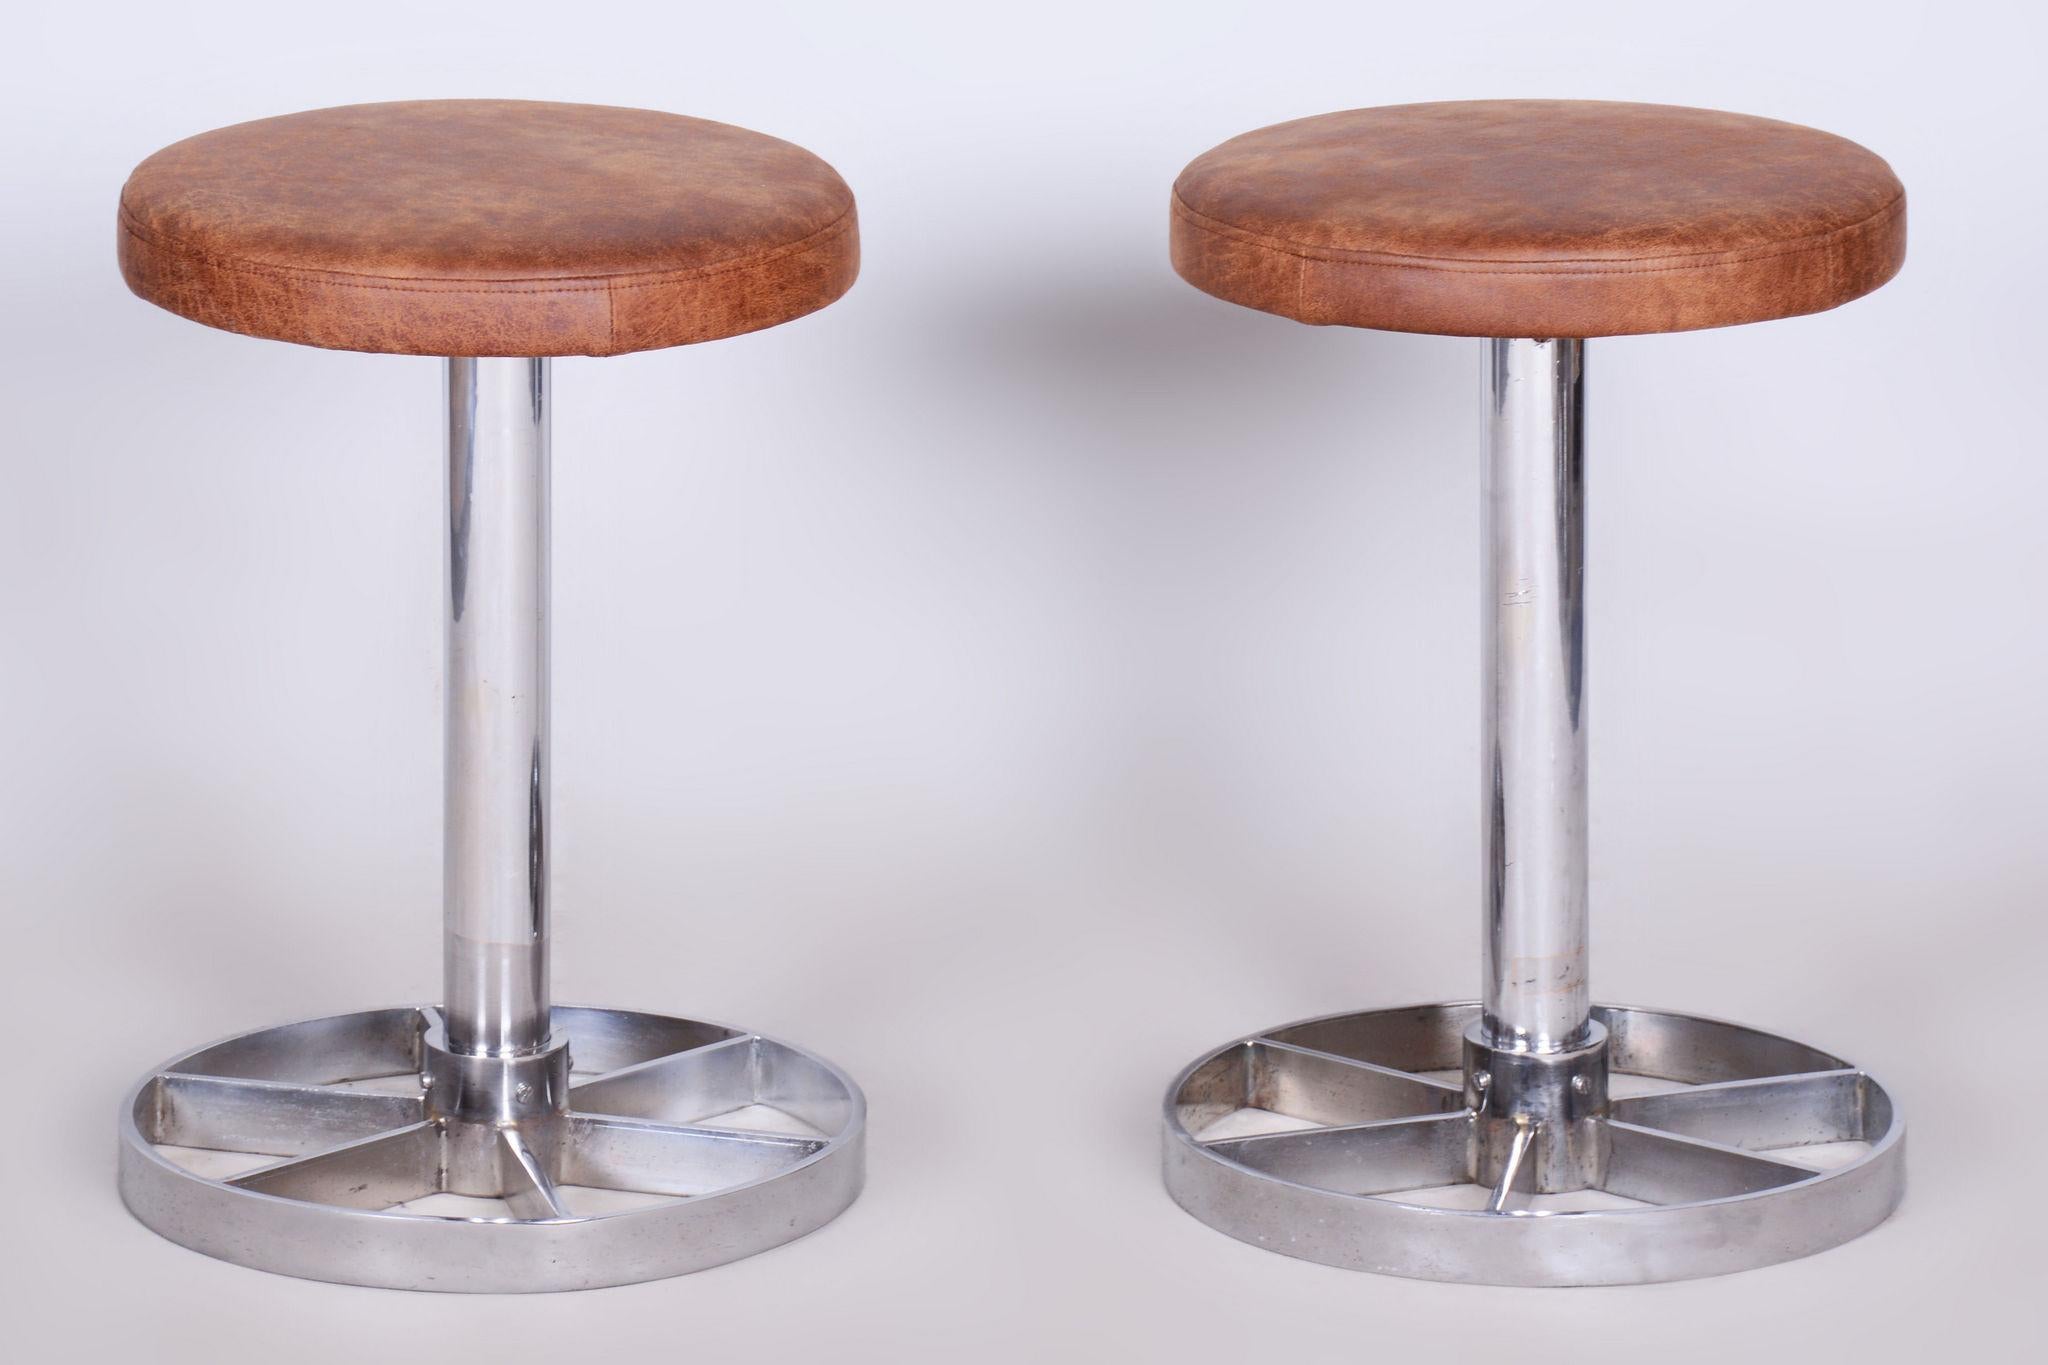 Mid-20th Century Pair of Bauhaus Chrome-Plated Steel Stools, Brown Leather, Czech, 1930-1939 For Sale